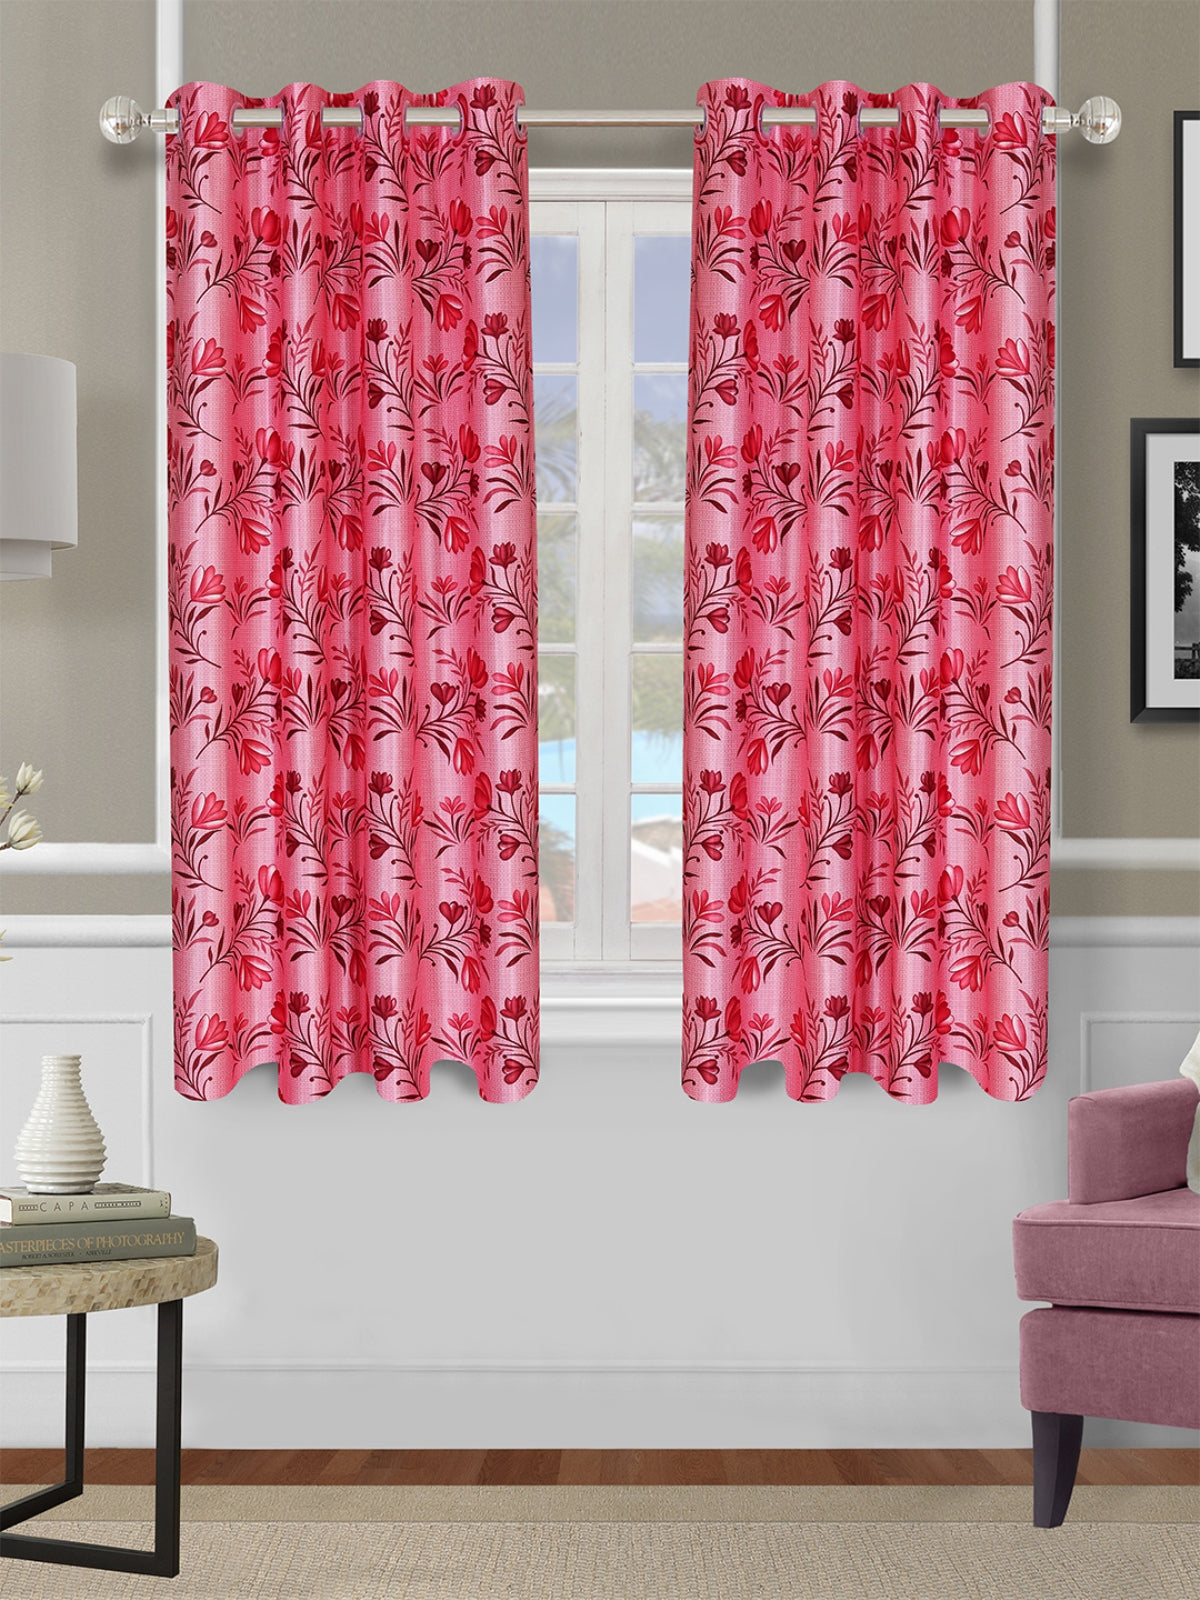 Romee Pink Floral Patterned Set of 2 Window Curtains